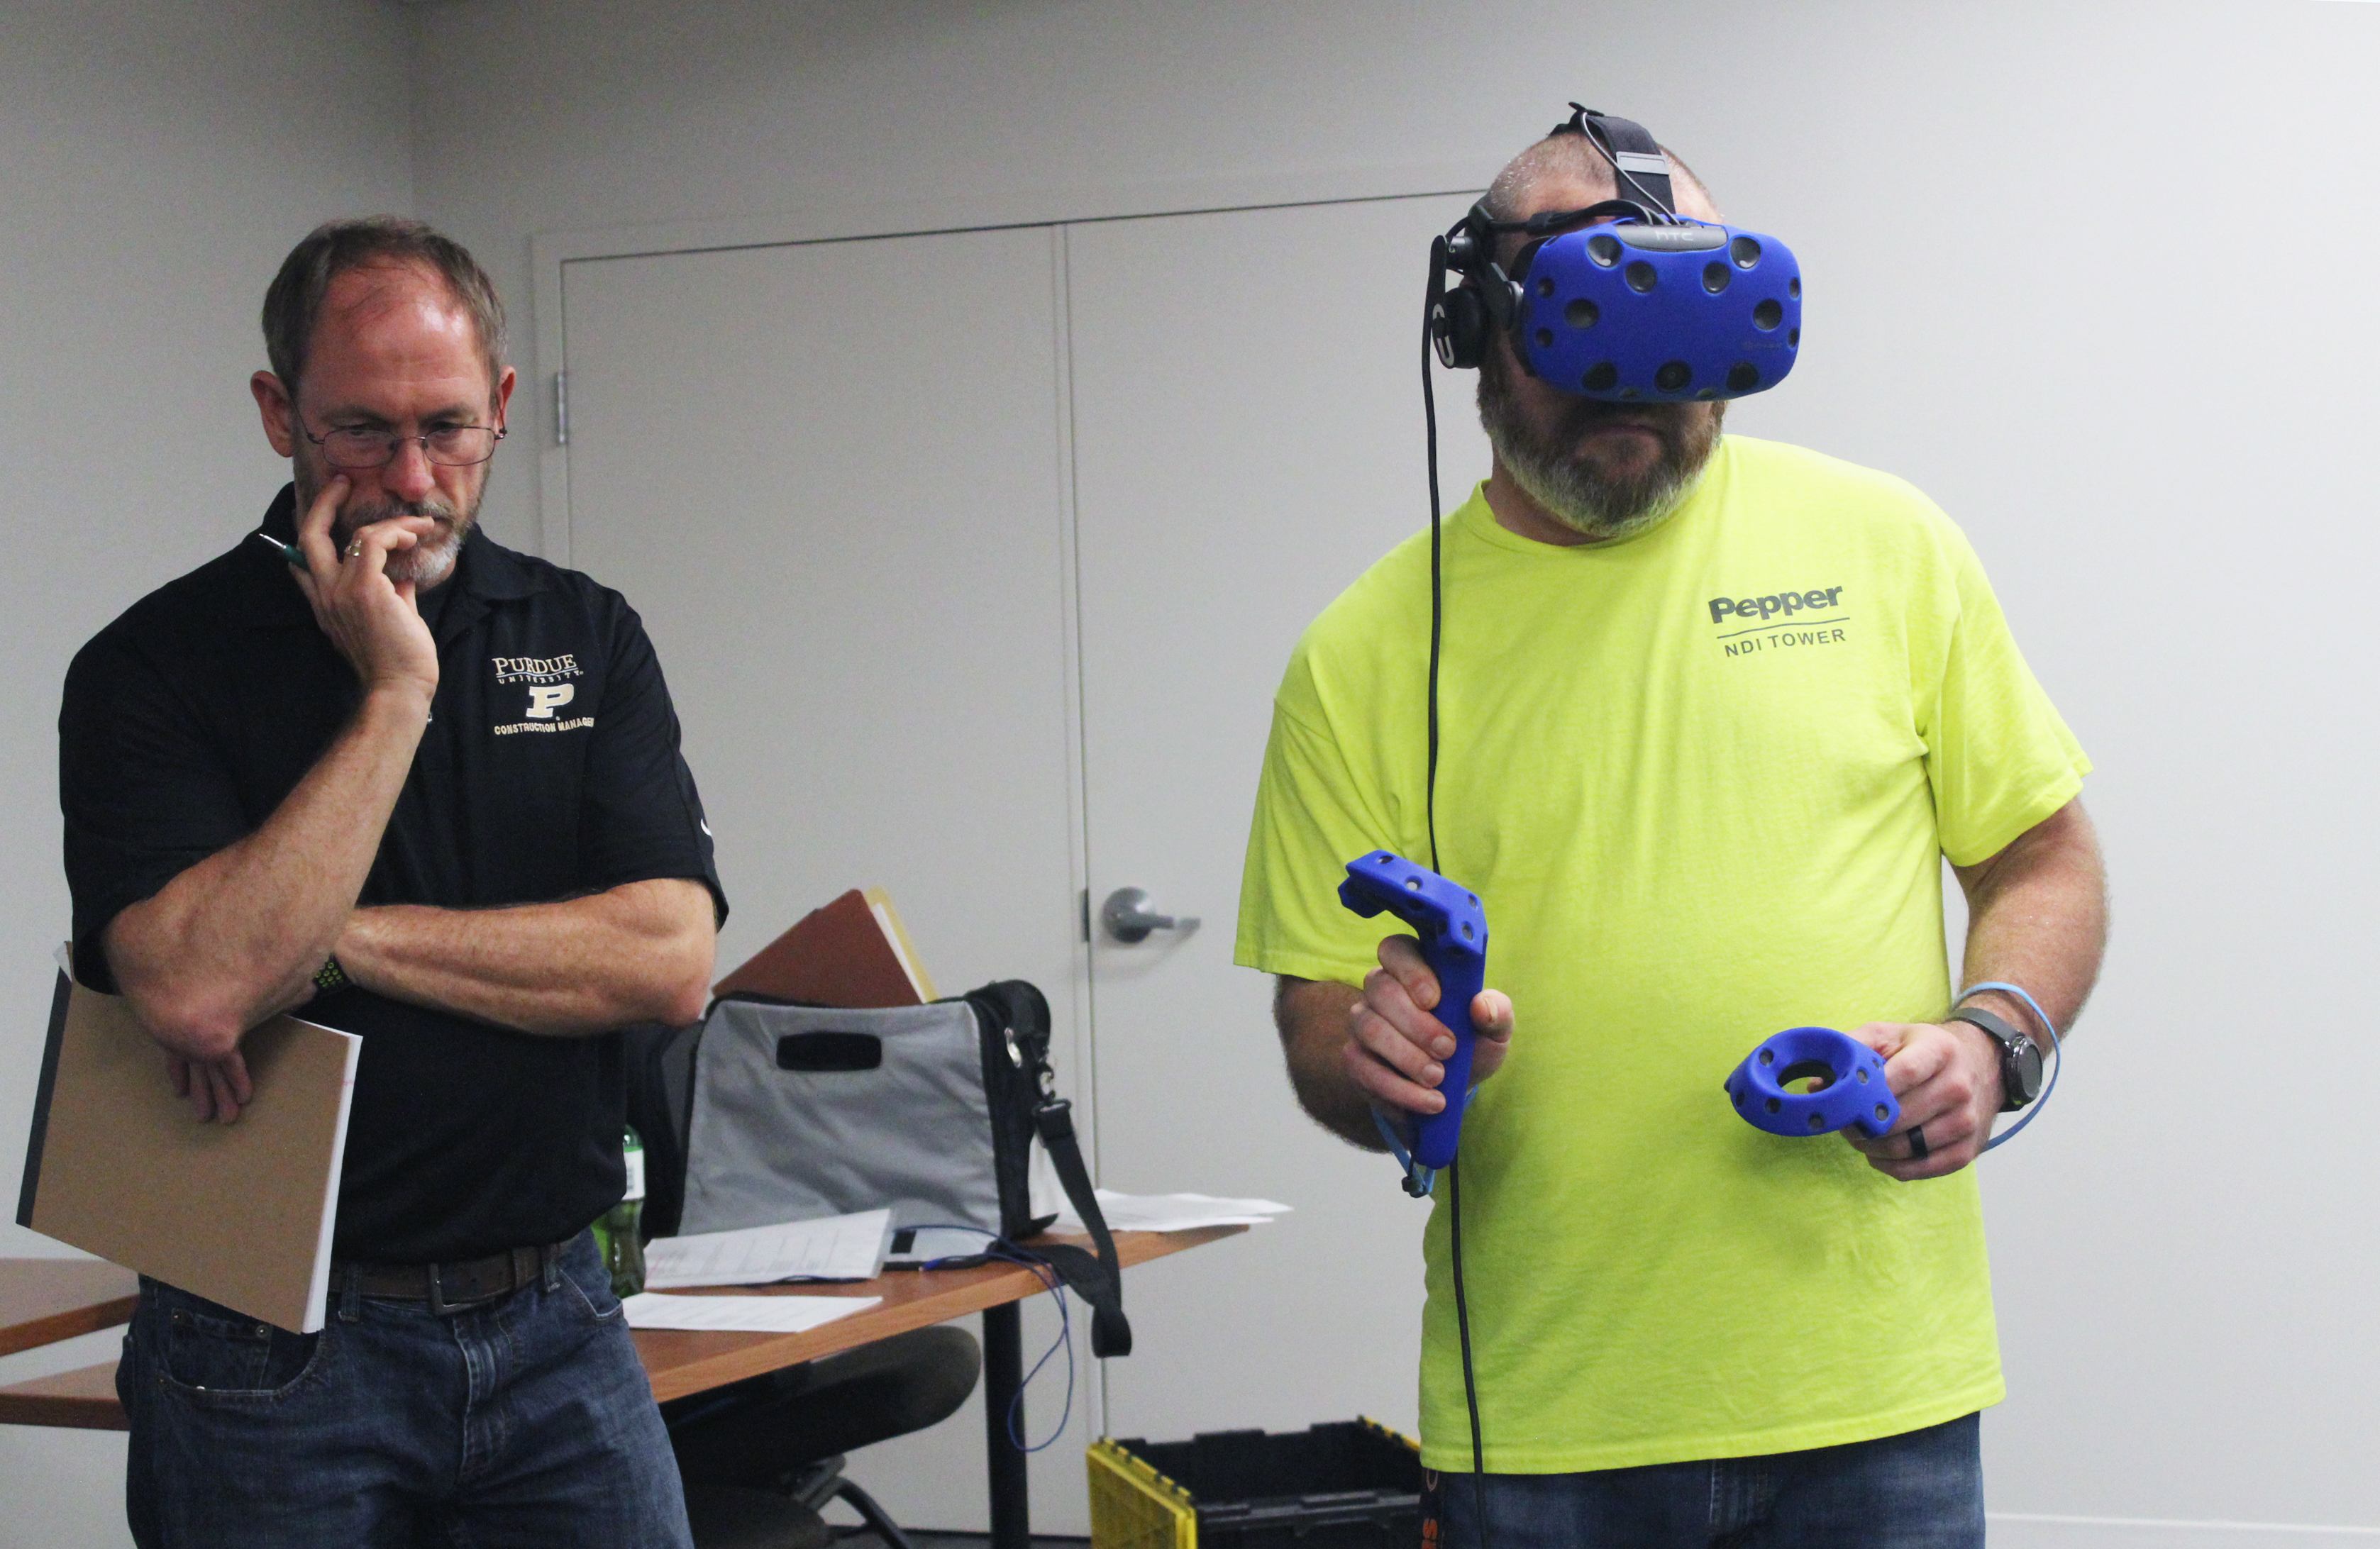 Pepper tests Purdue's VR safety modules